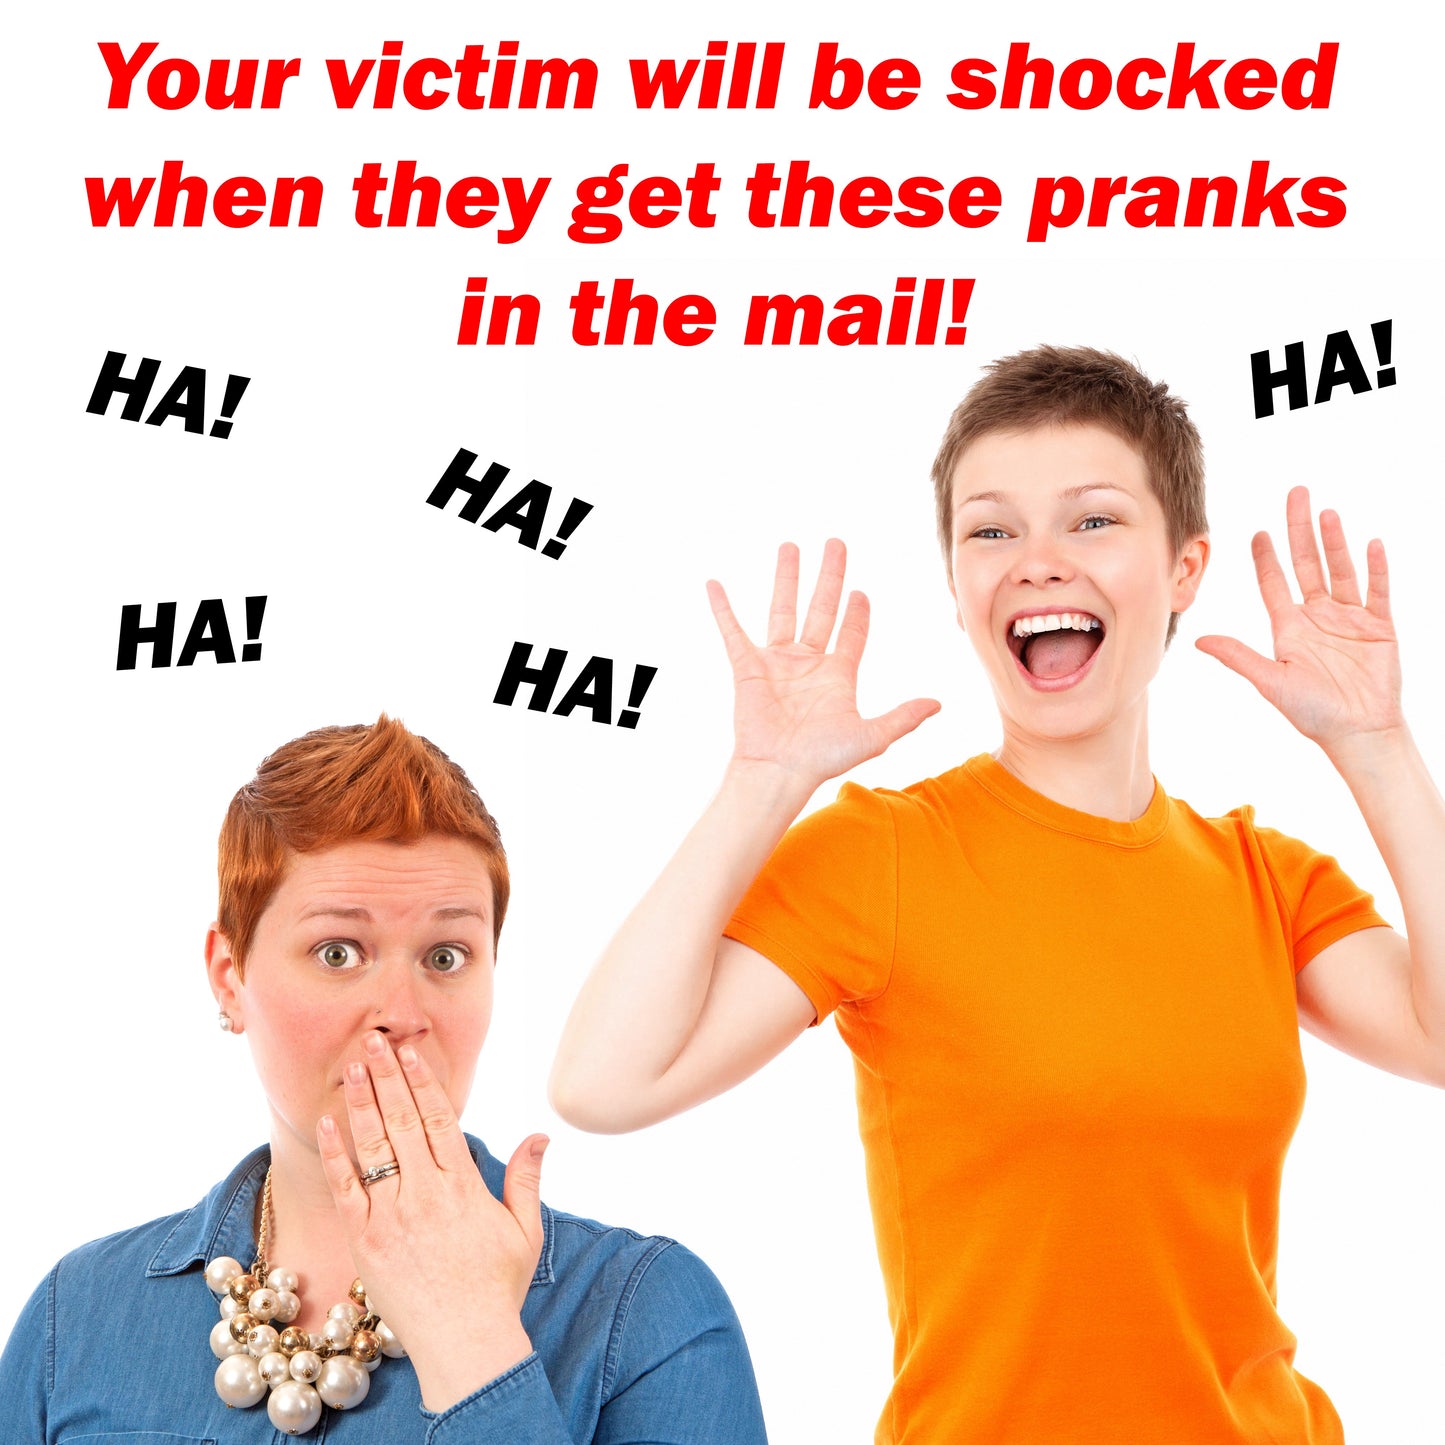 Prank Mail - Heavy Doodie Adult Diapers embarrassing prank box gets mailed directly to your victims 100% anonymously!